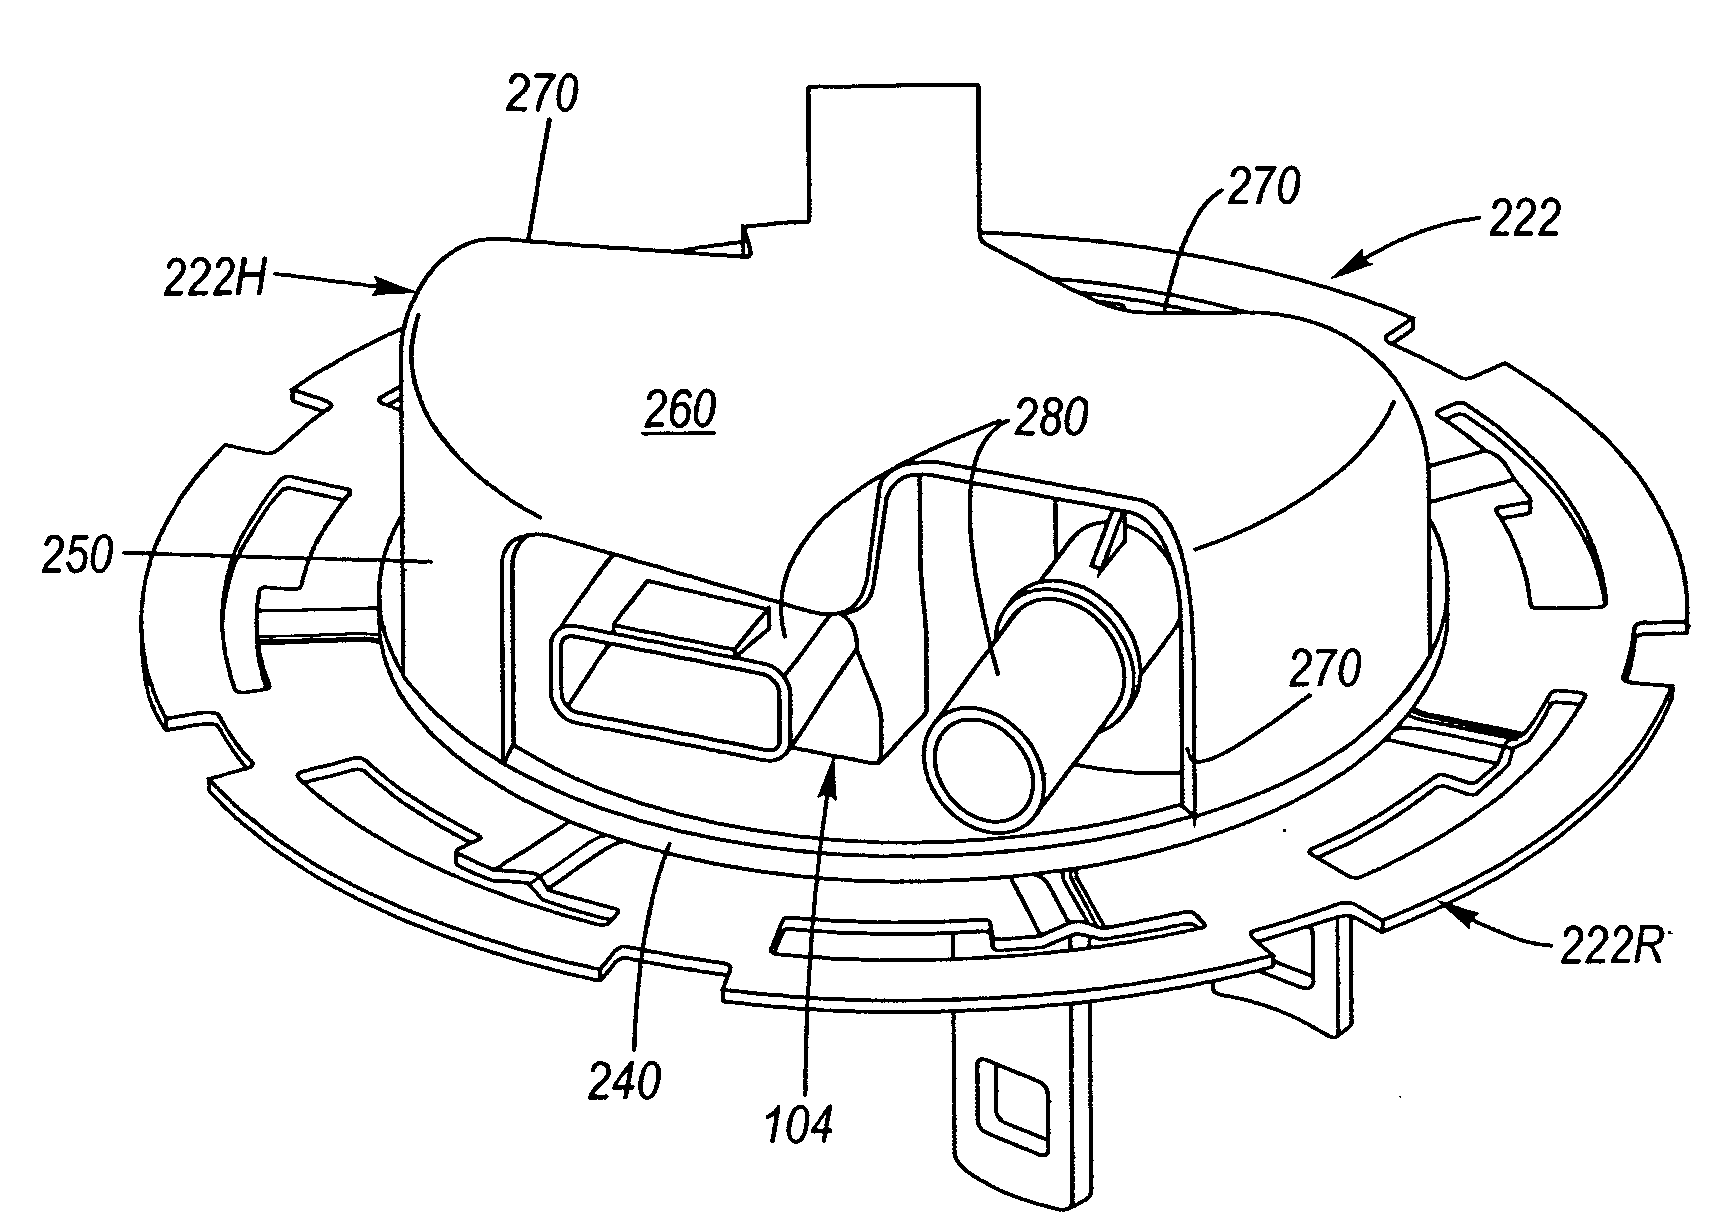 Helmeted lock ring for a sender module closure system for a fuel tank